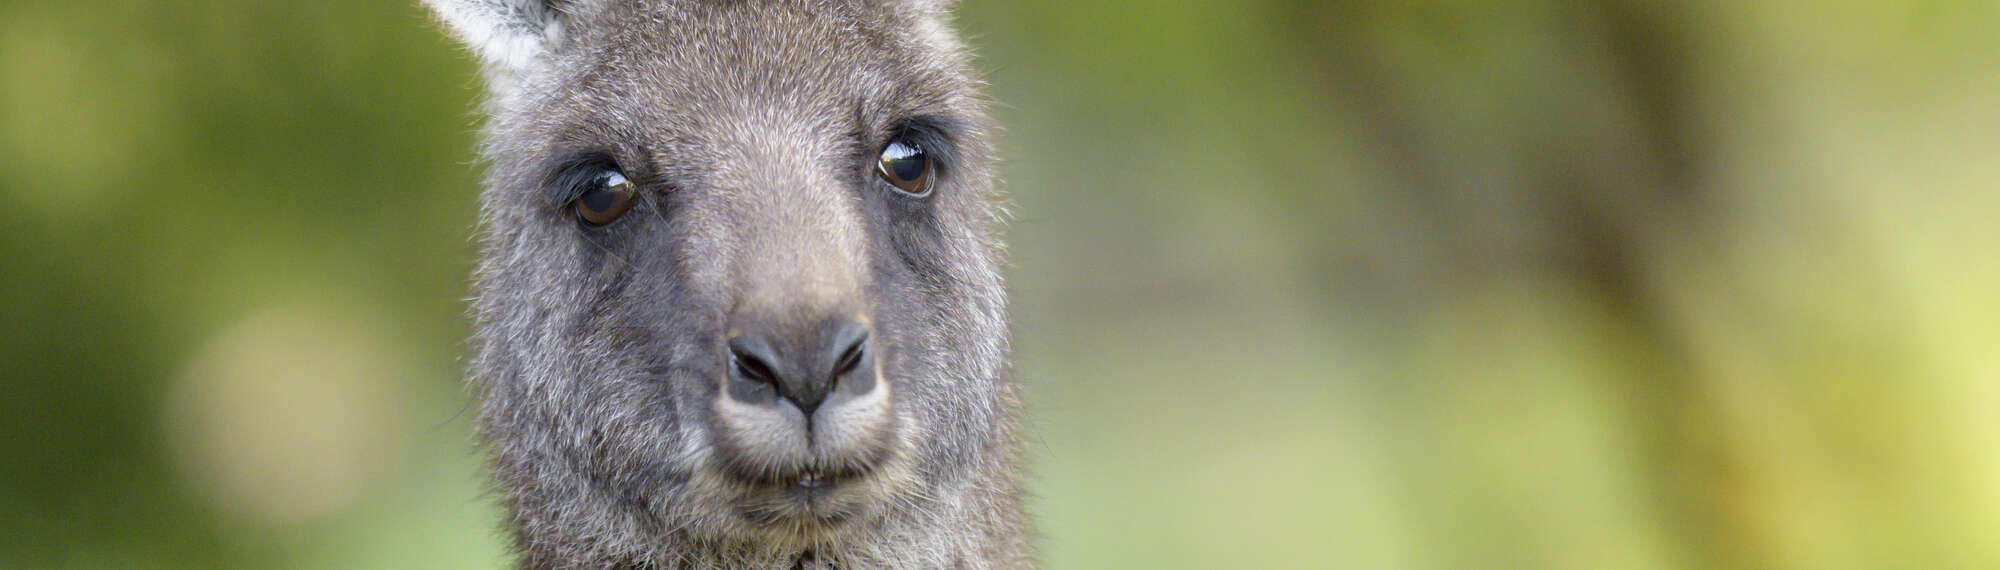 The face of a fluffy brown Eastern Grey Kangaroo 